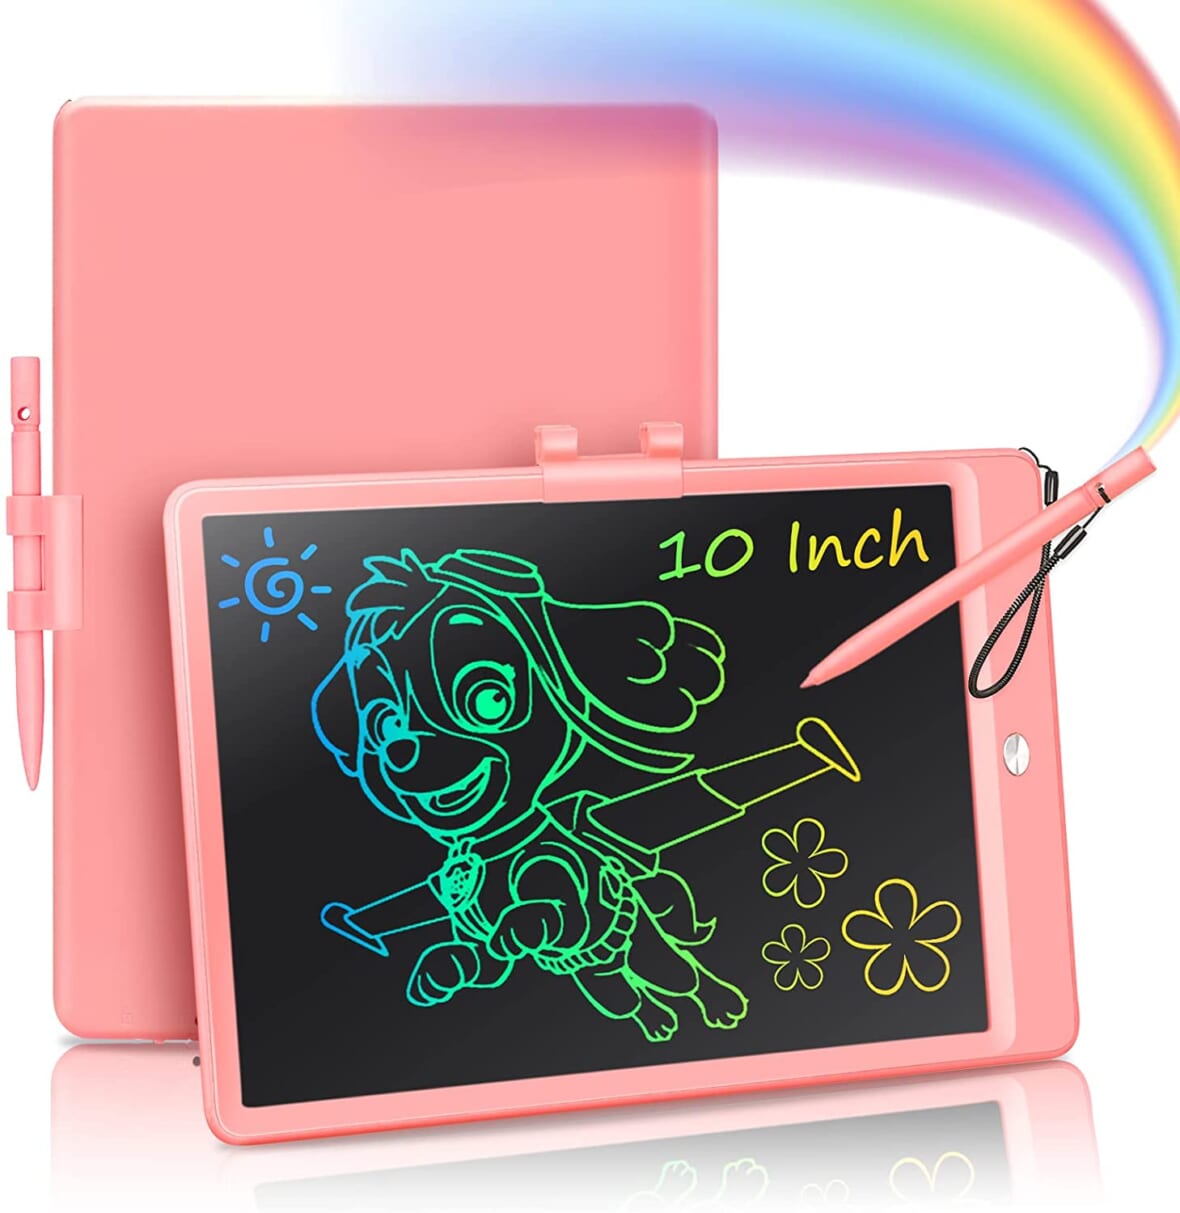 How to Build the Best Easter Basket for Kids: LCD Writing Tablet